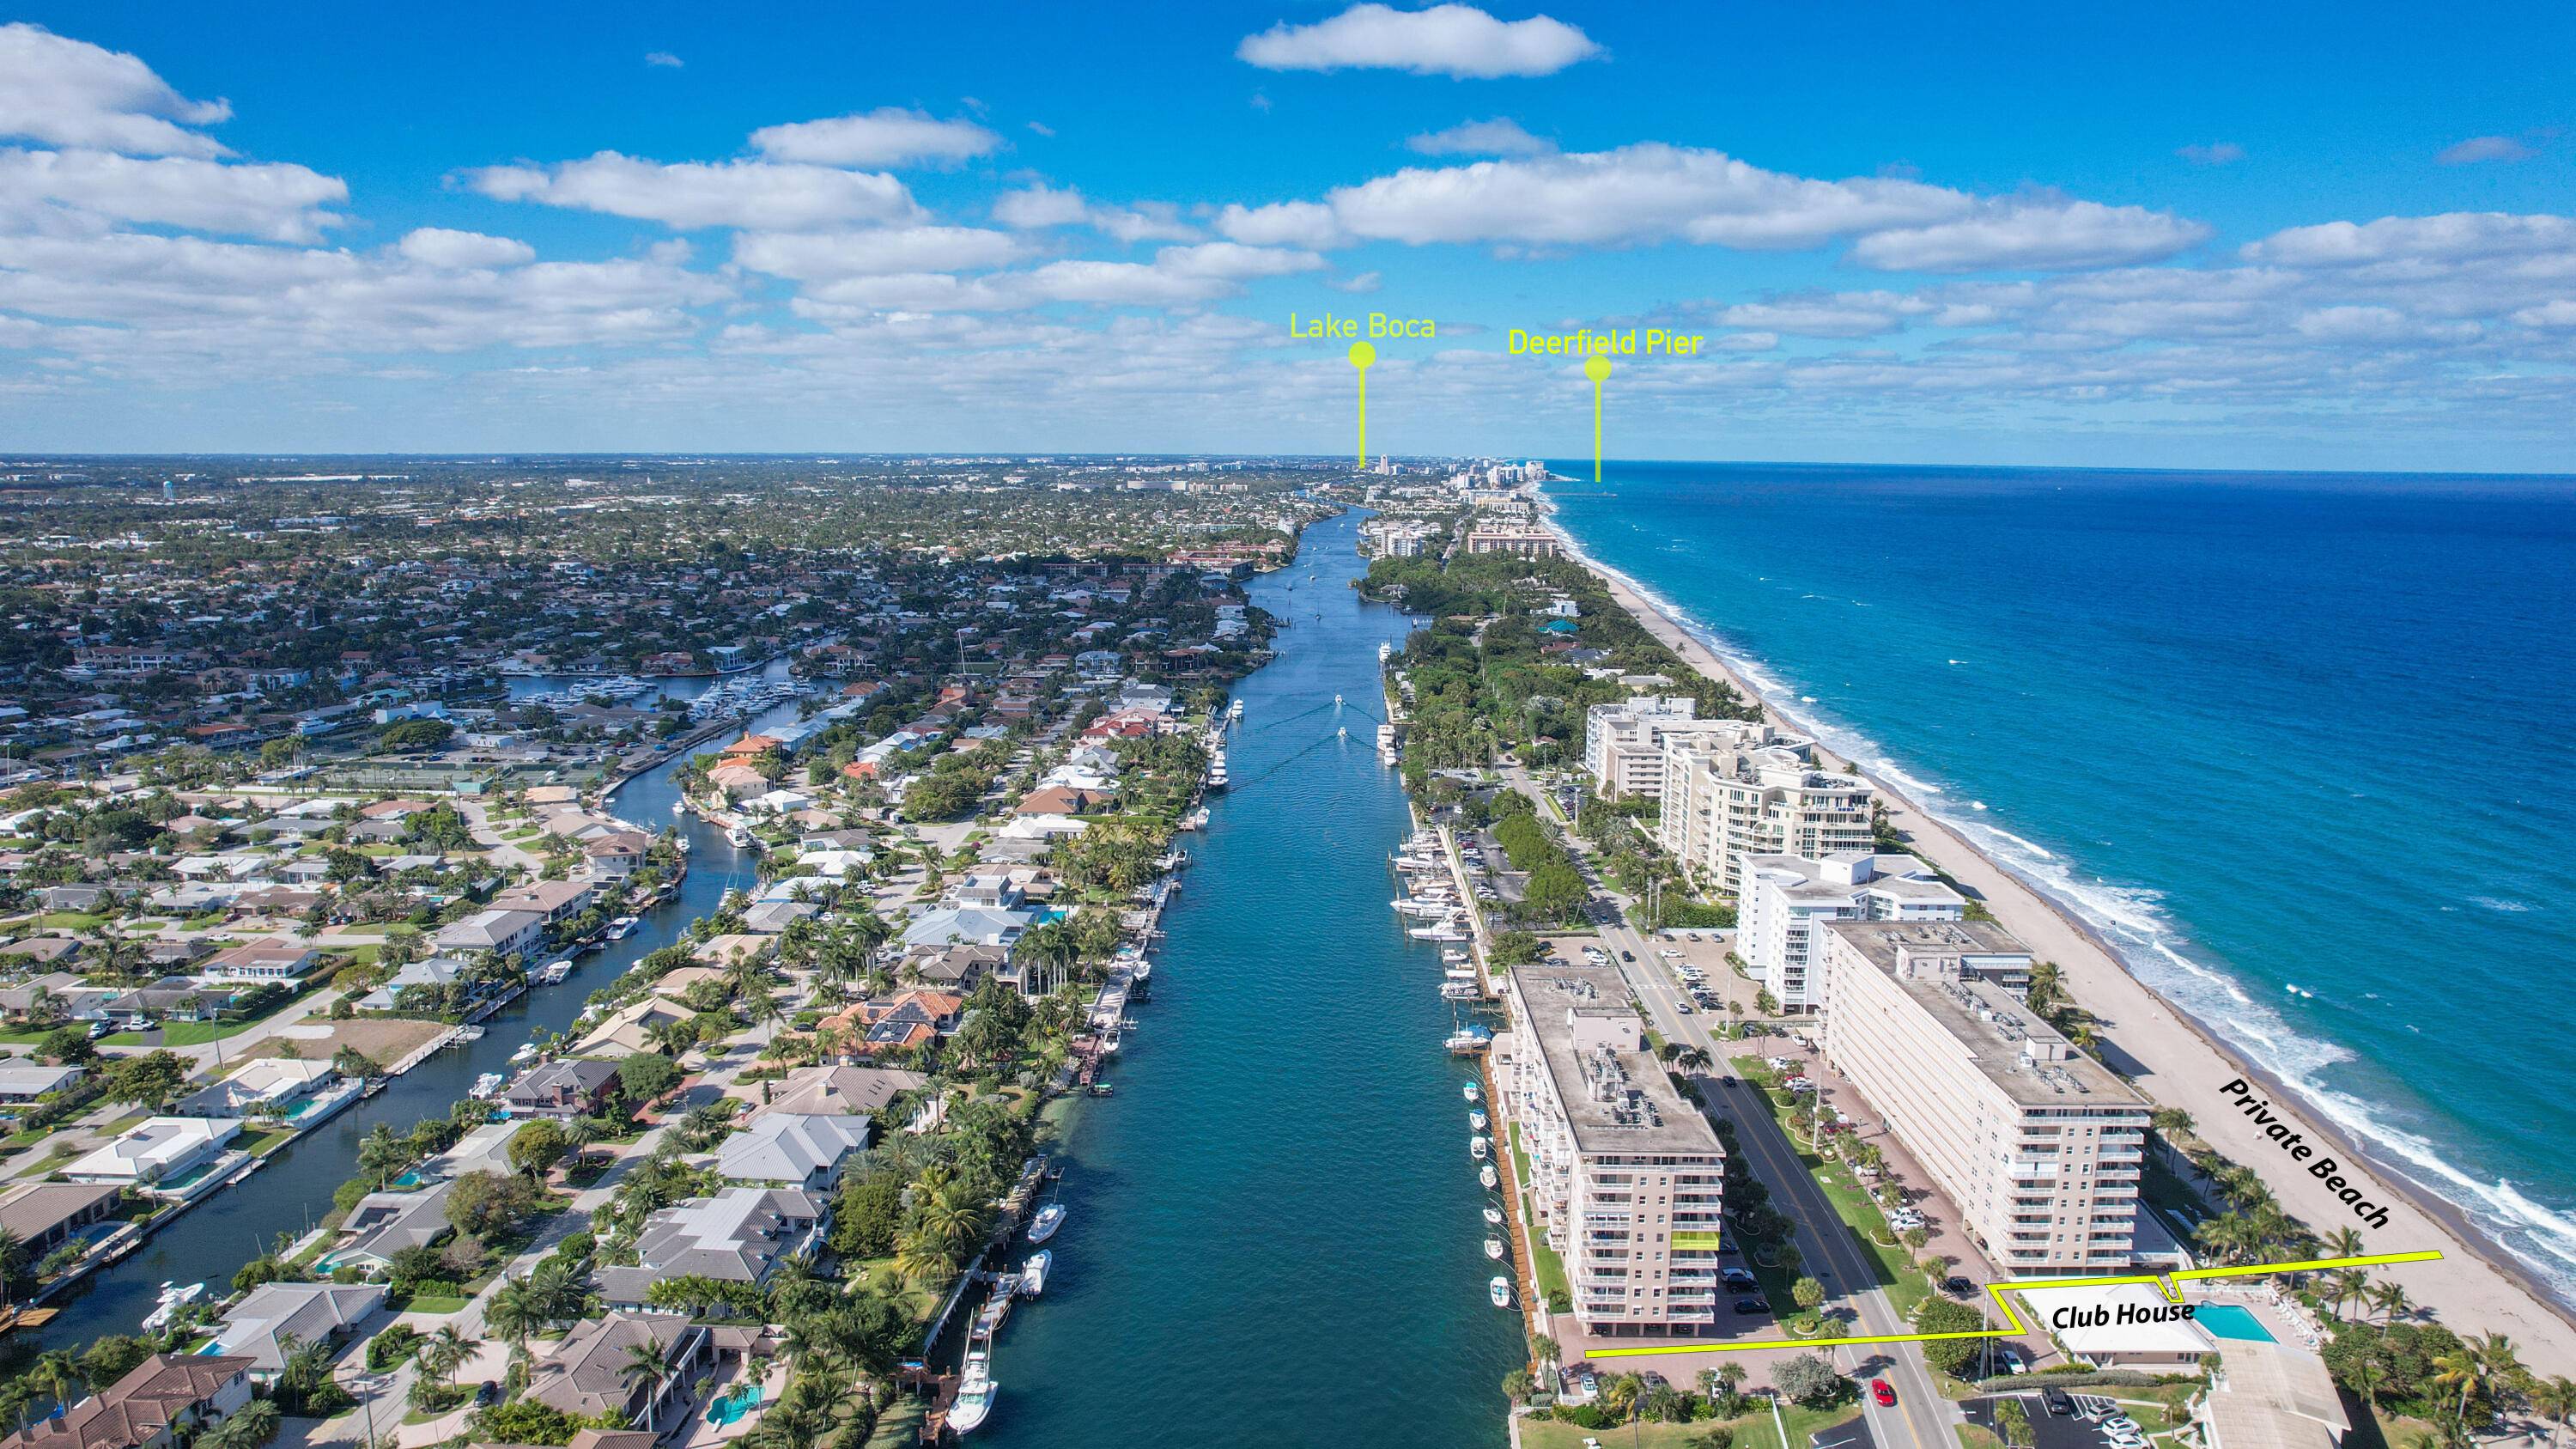 Luxurious 2 bedroom, 2 bathroom Condo rental with breathtaking ocean and intracoastal views from the balcony.